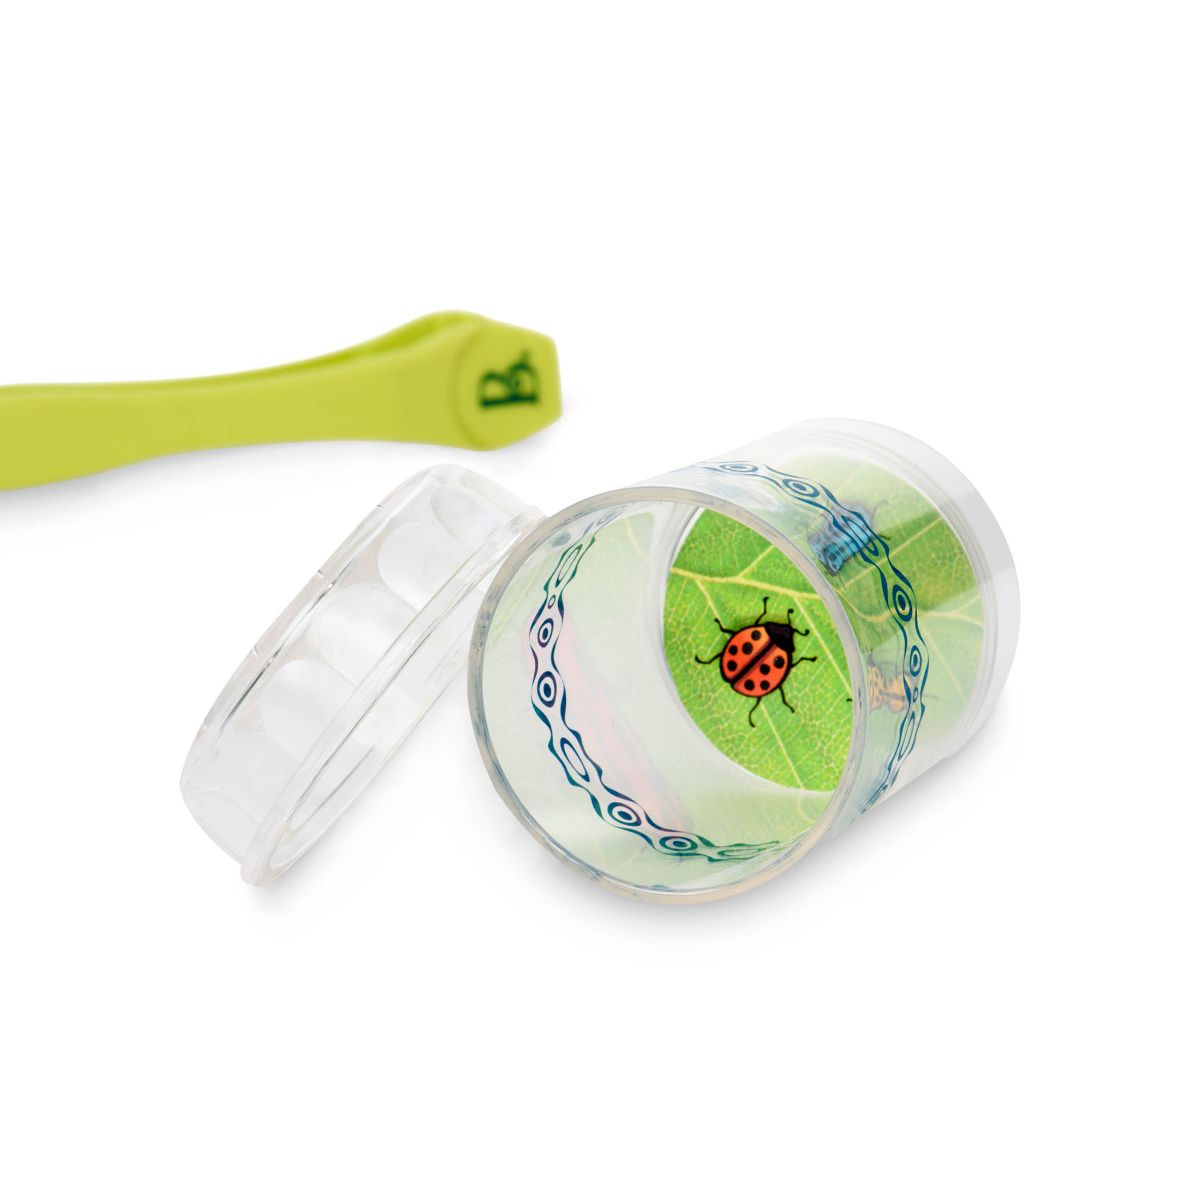 B toys by Battat Bug Bungalow Insect Catching Kit Bug toys for kids 3+ 